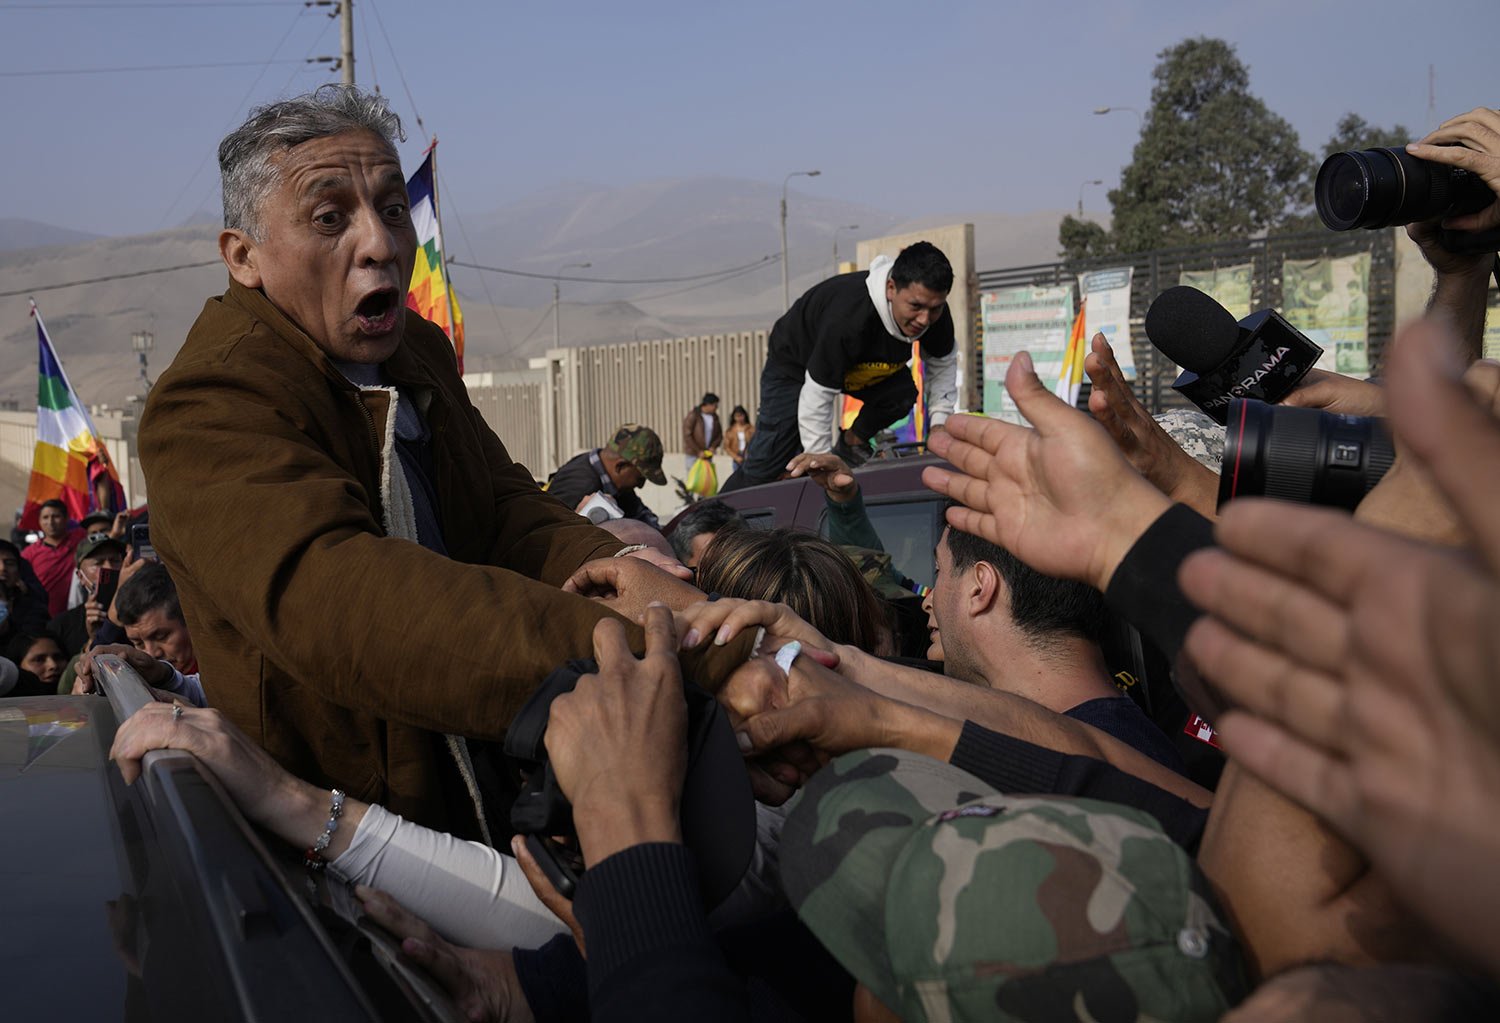  Former Army Maj. Antauro Humala, the brother of former President Ollanta Humala, greets supporters after he was released from prison, on the outskirts of Lima, Peru, Saturday, Aug. 20, 2022. Humala was serving a 19-year sentence for rebellion after 